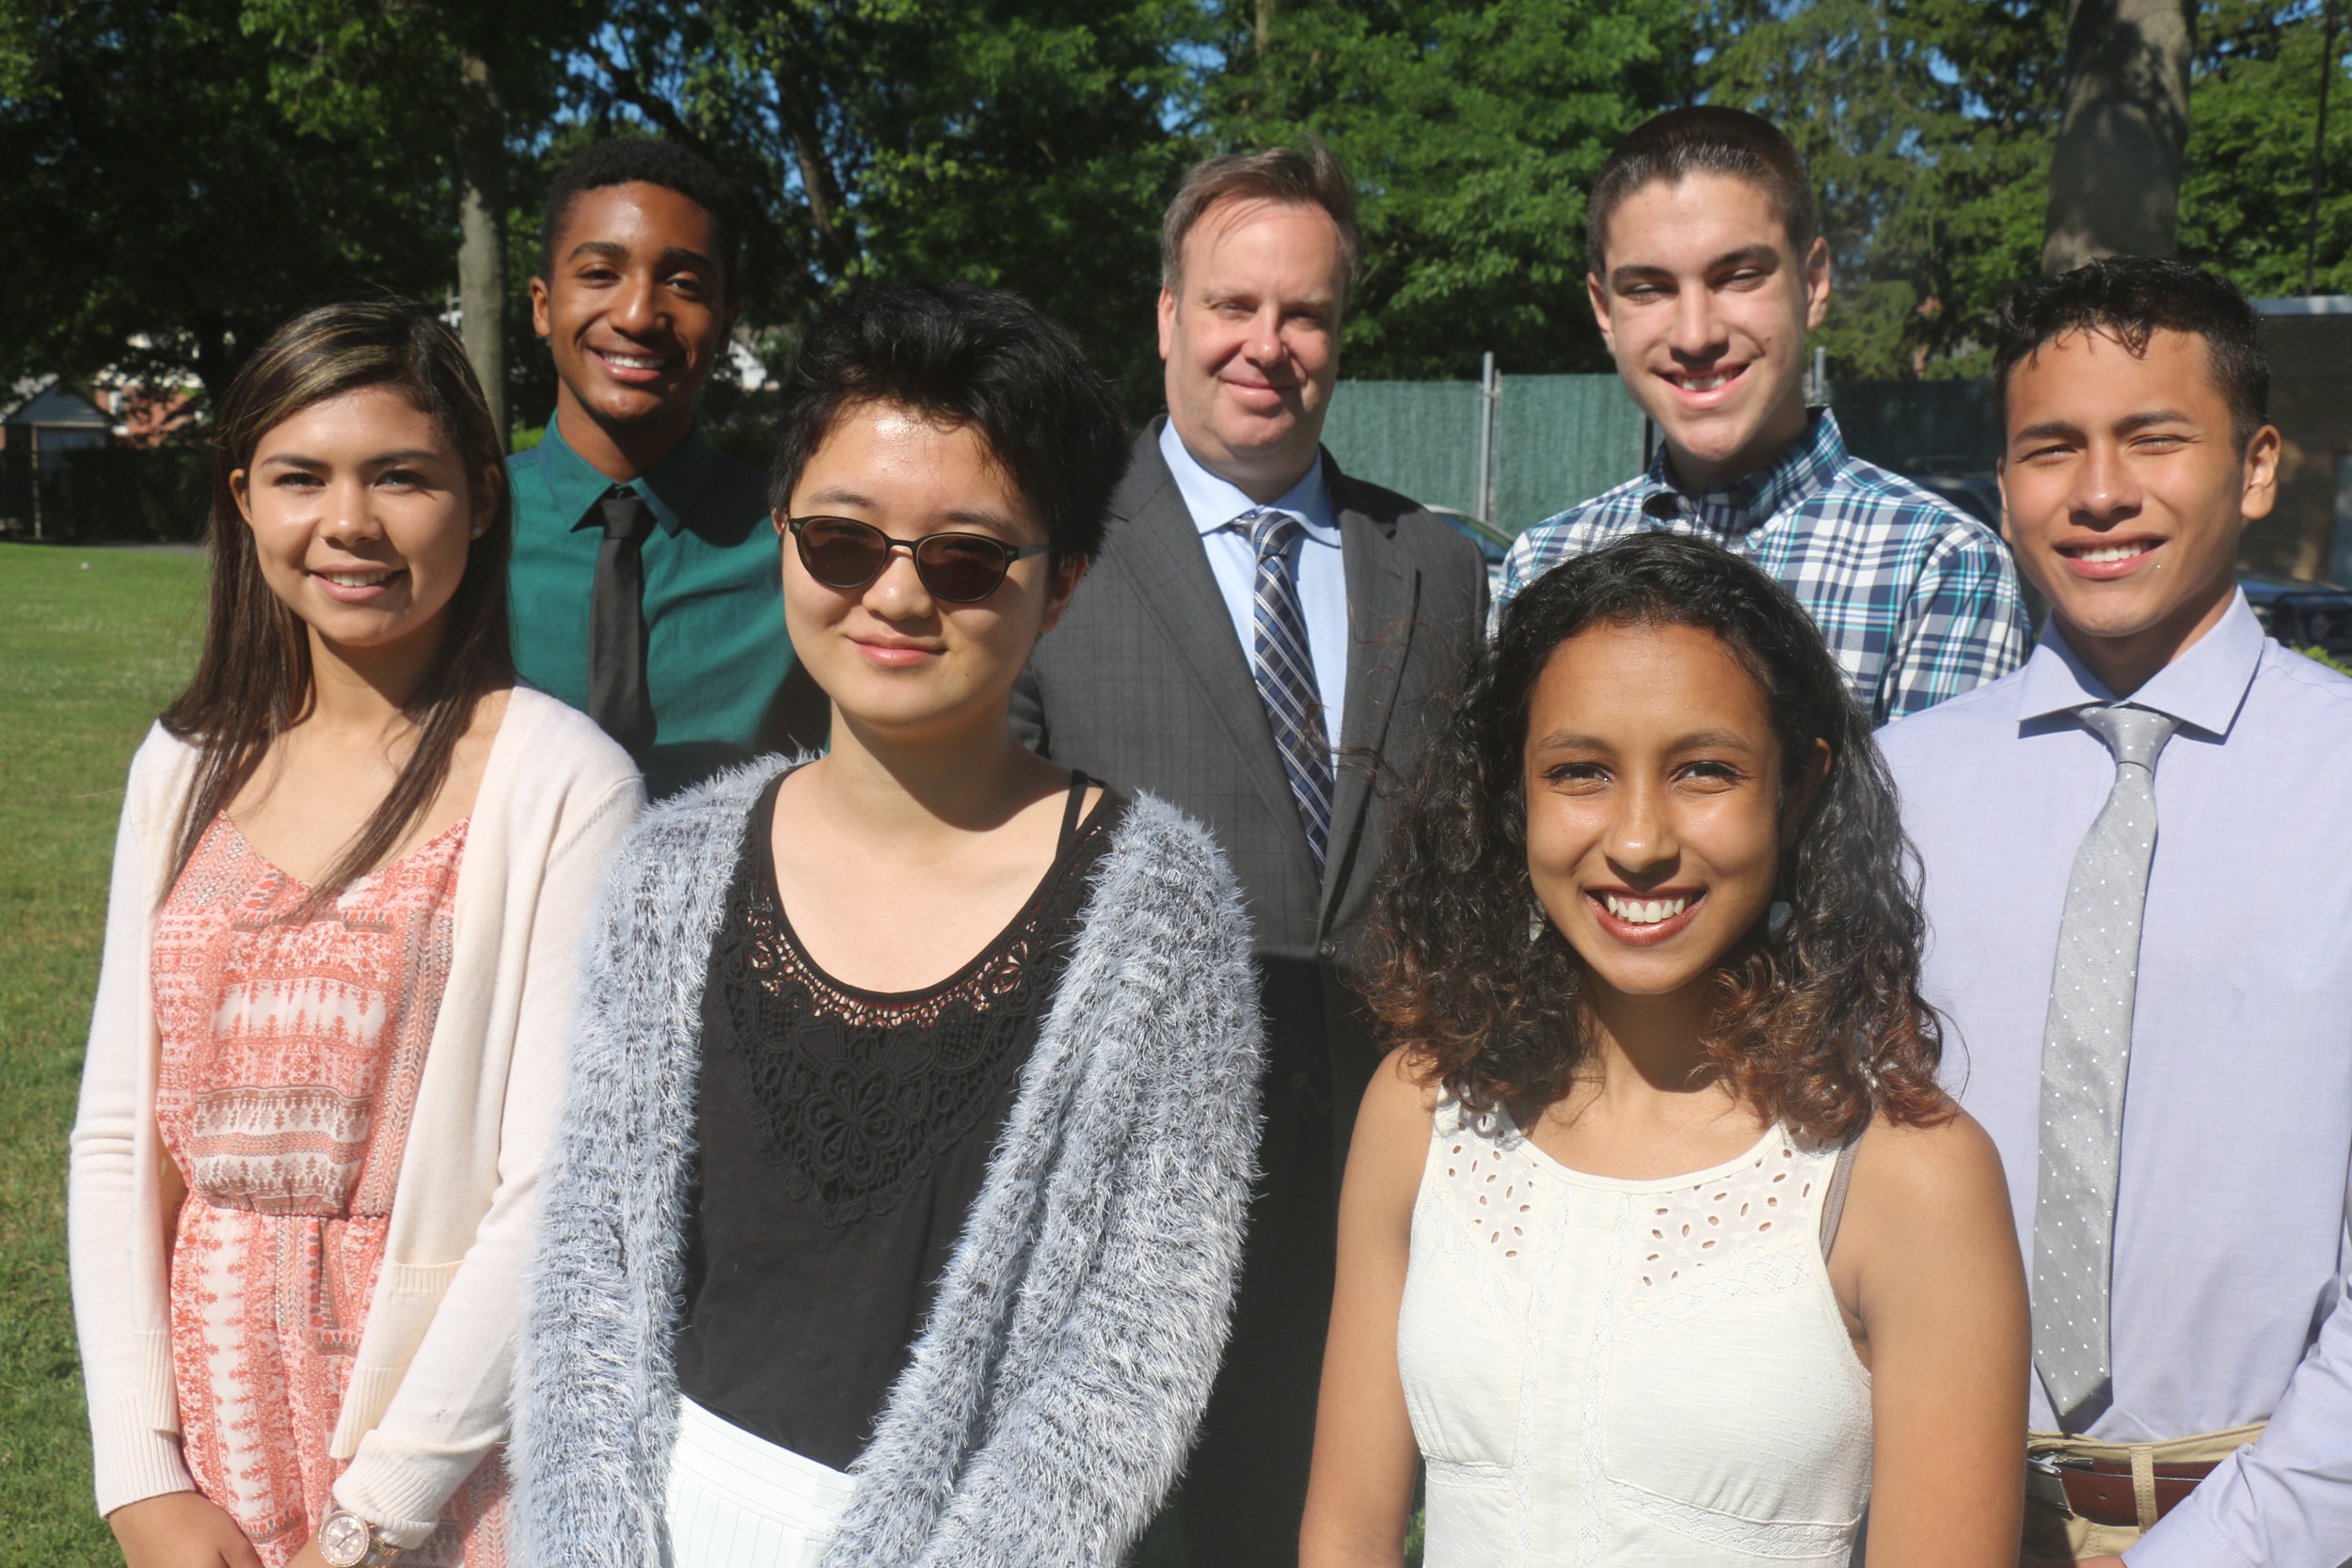 Superintendent Bill Heidenreich, center, with, clockwise from left, Tiffany Longarzo, Ashton Dacon, Thomas Elbert, Jason Paz, Morgan Foster and Allyce Yang. The group spoke to the Herald about their academic careers and their aspirations.